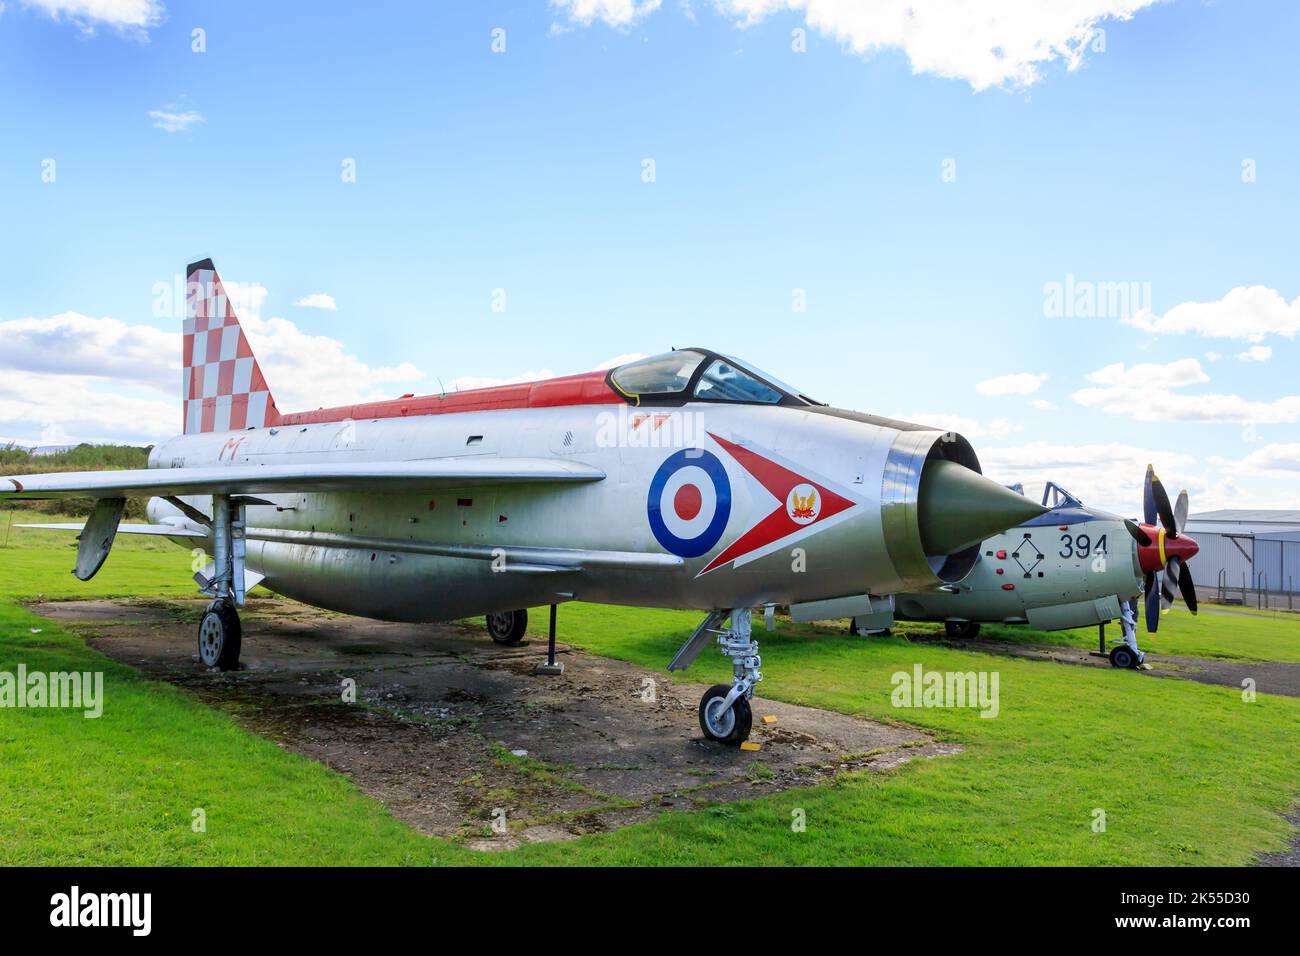 Carlisle, England, September 16, 2022 : Side view of  an old English Electric Lightning Jet fighter with an old Fairey Gannet plane in the background Stock Photo